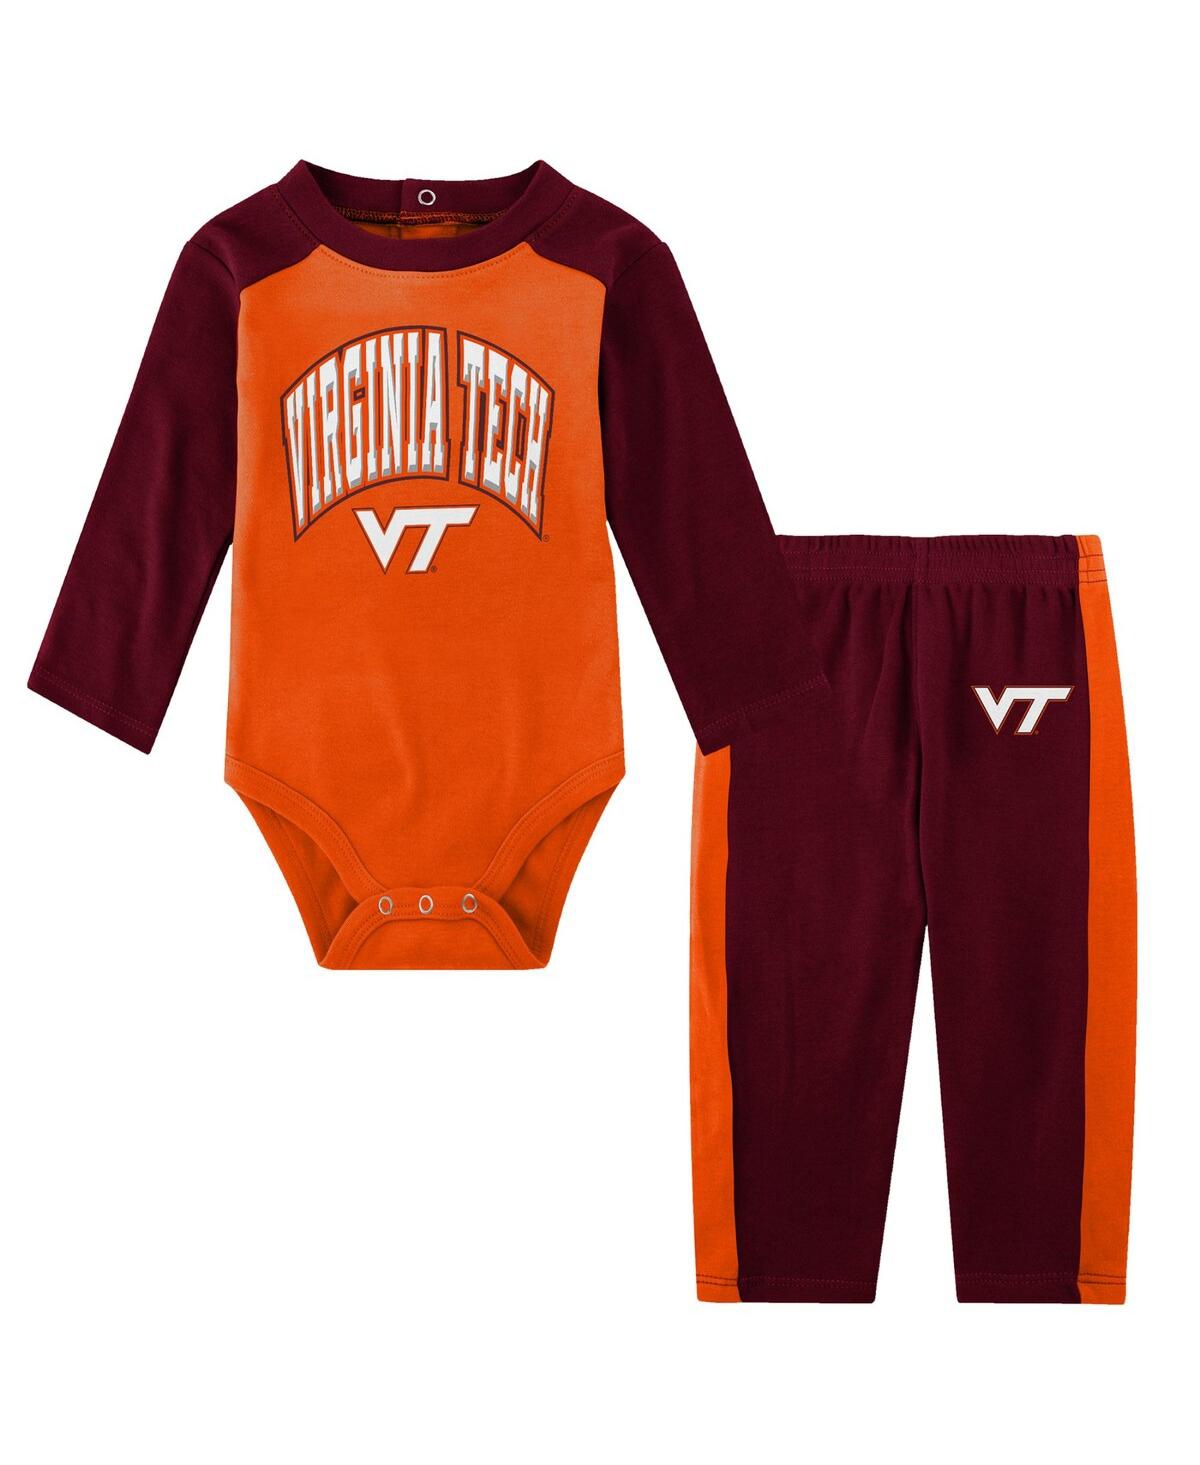 Outerstuff Babies' Infant Boys And Girls Maroon Virginia Tech Hokies Rookie Of The Year Long Sleeve Bodysuit And Pants 